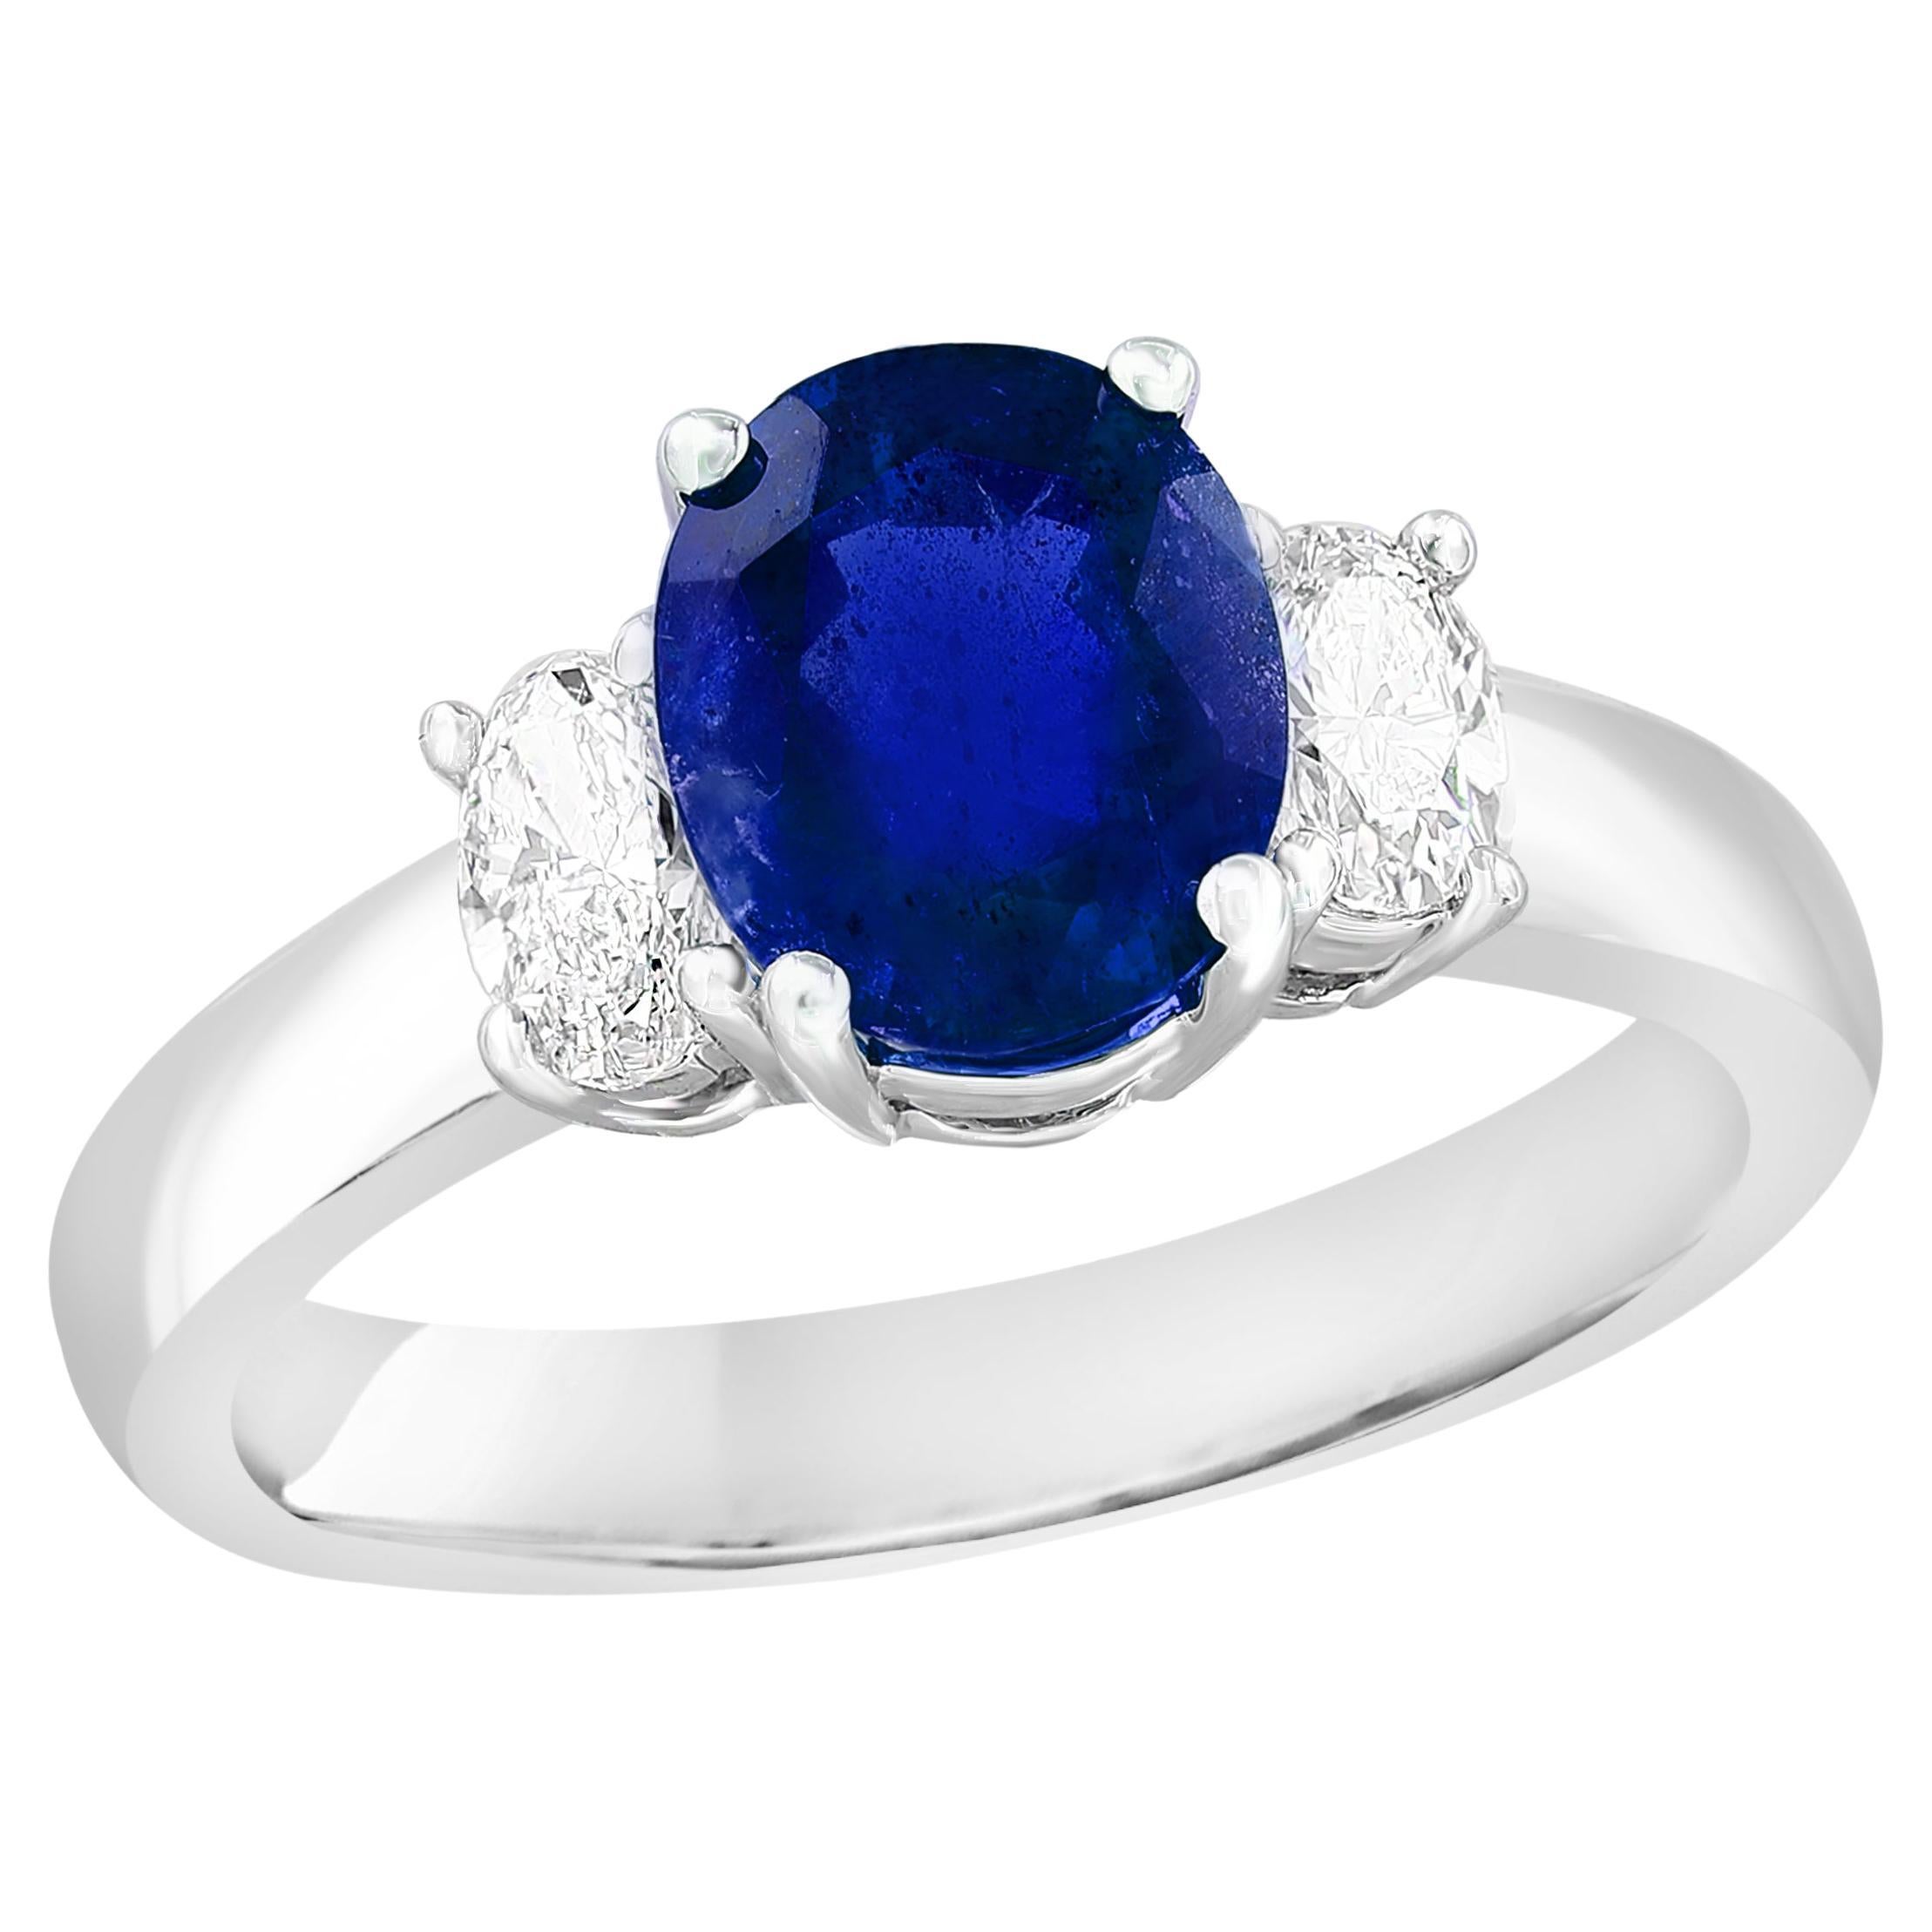 2.12 Carat Oval Cut Sapphire & Diamond 3 Stone Engagement Ring in 18k White Gold For Sale